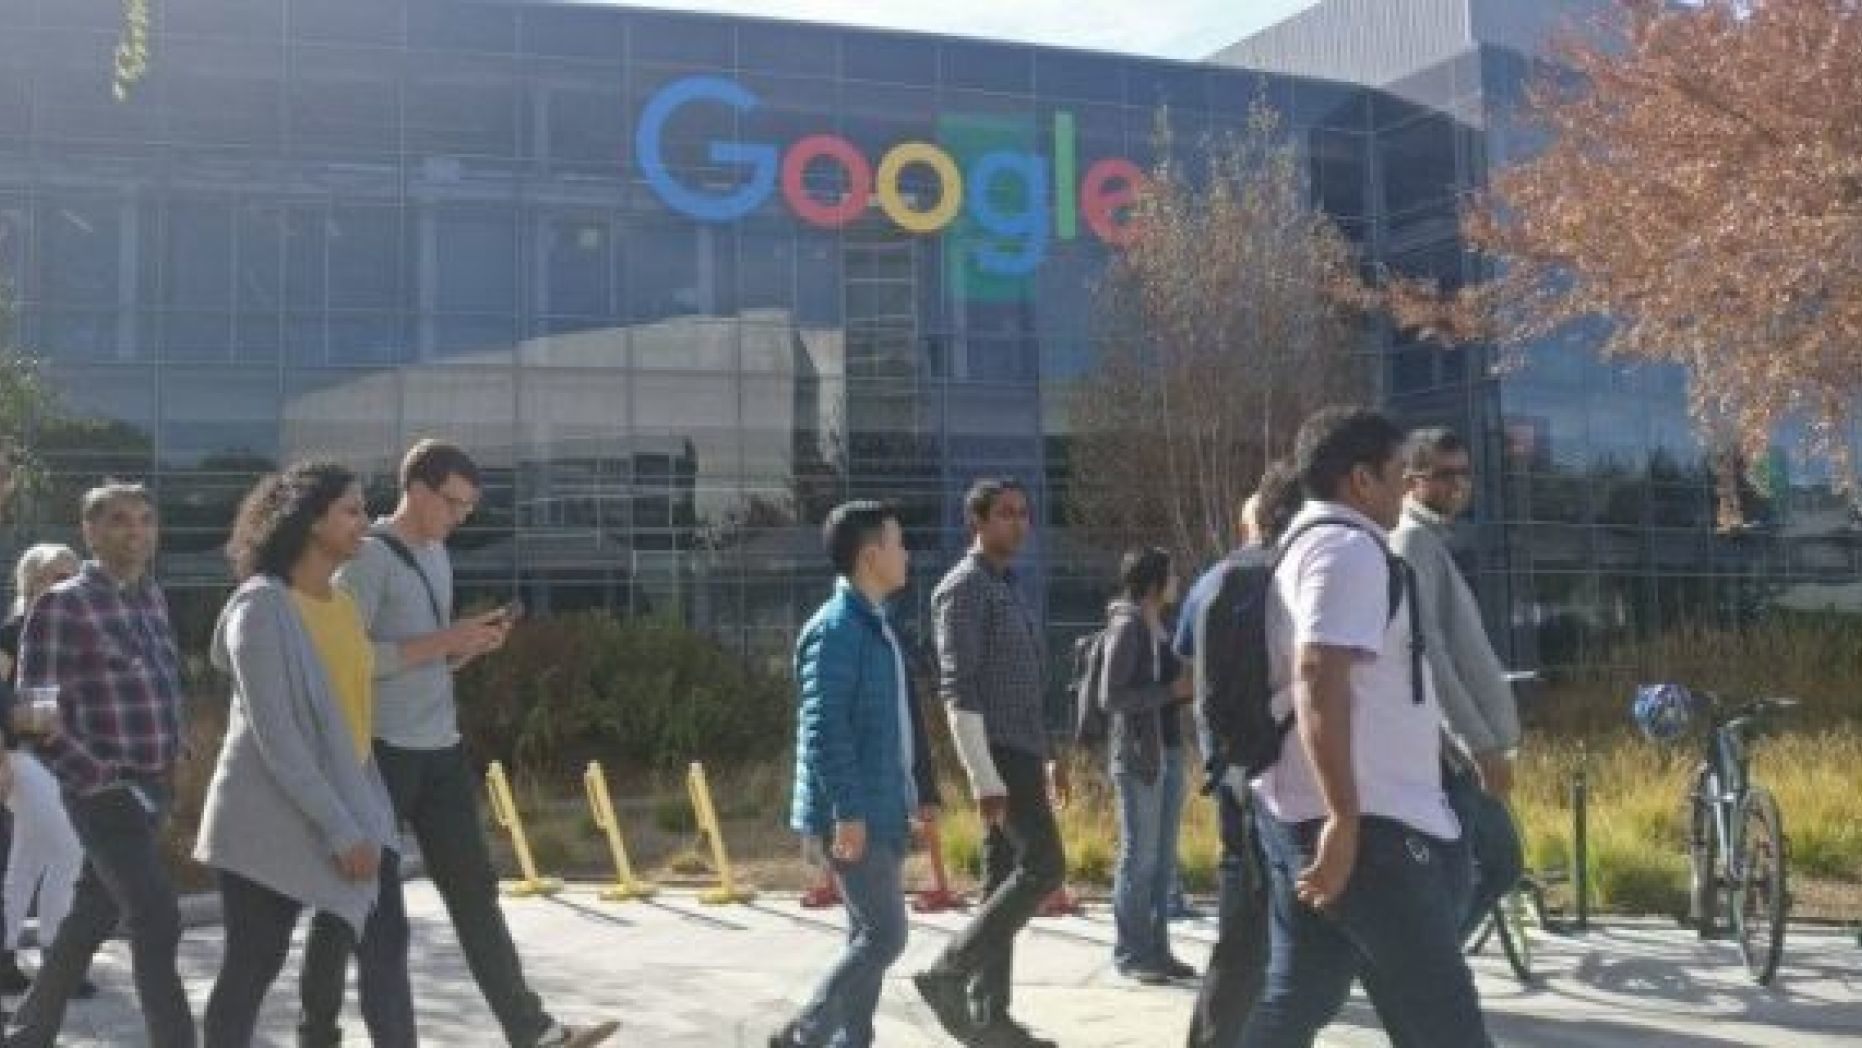 The infected  "Googler," entered the building in Mountain View on April 4.